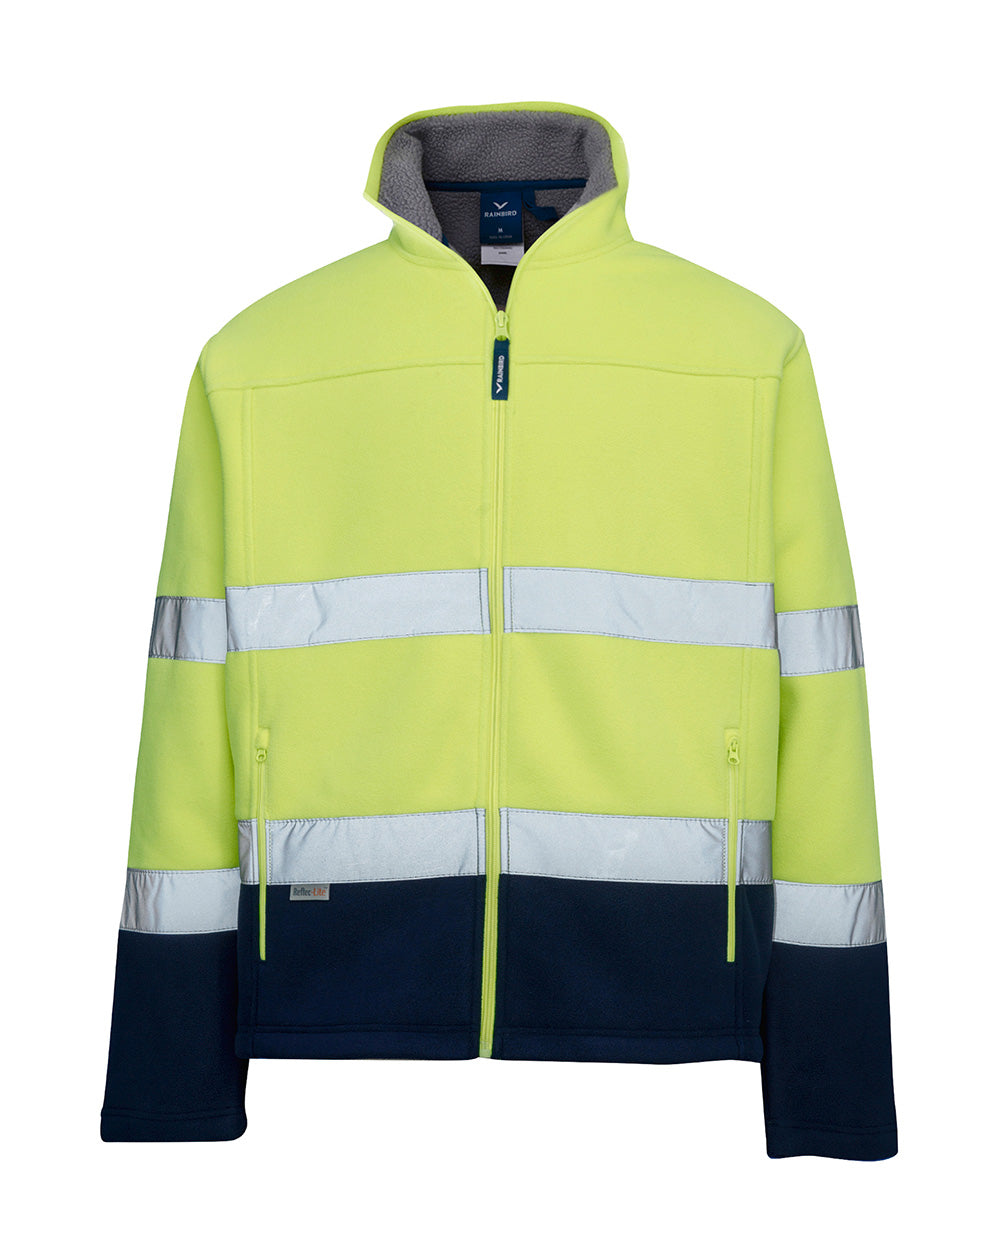 Lumber Jacket with Tape in Fluoro Yellow & Navy